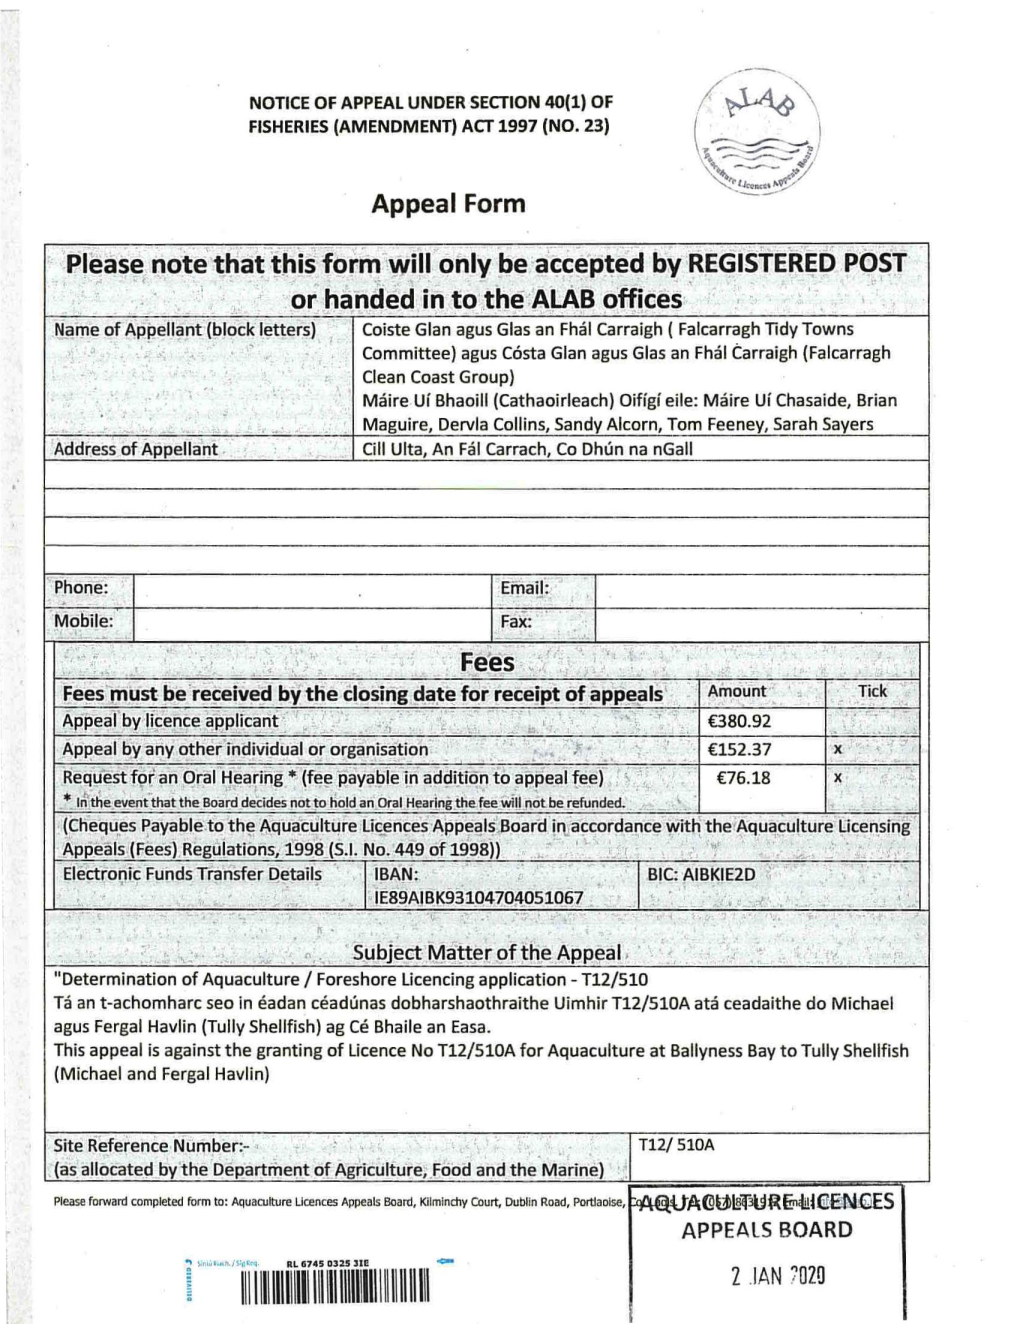 1 Appeal Form Please Note That This Form Will Only Be Accepted By